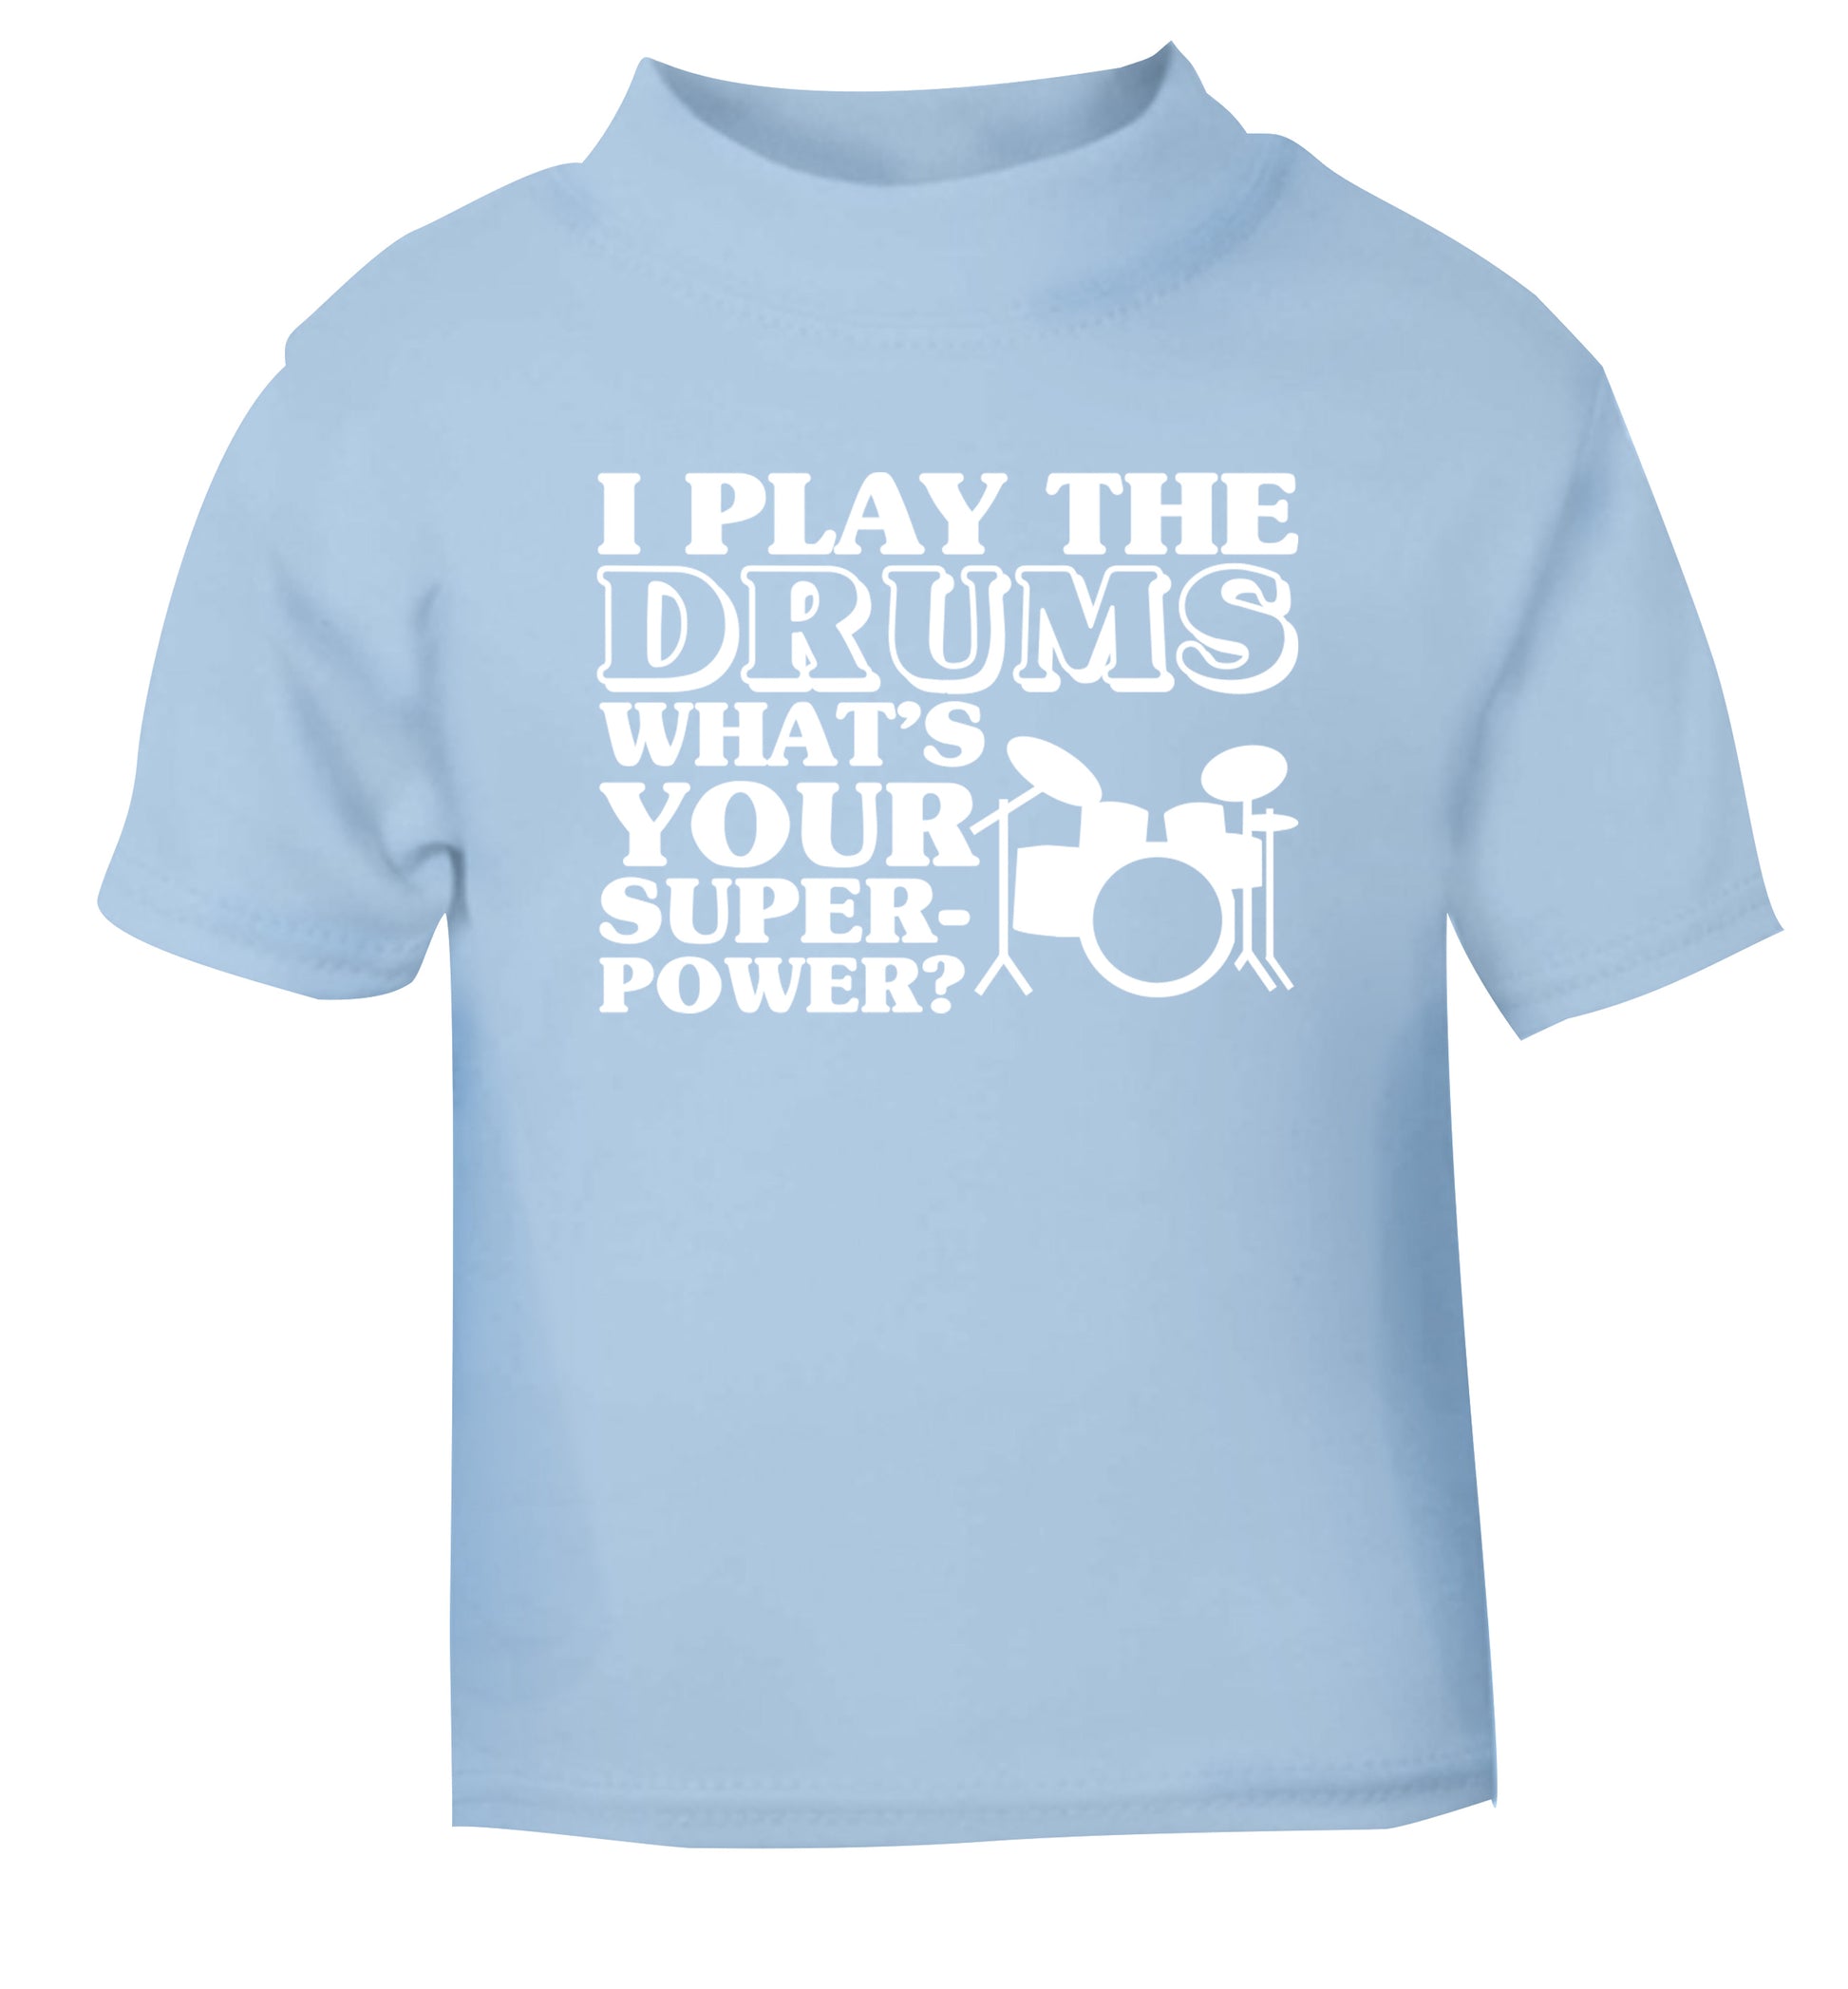 I play the drums what's your superpower? light blue Baby Toddler Tshirt 2 Years